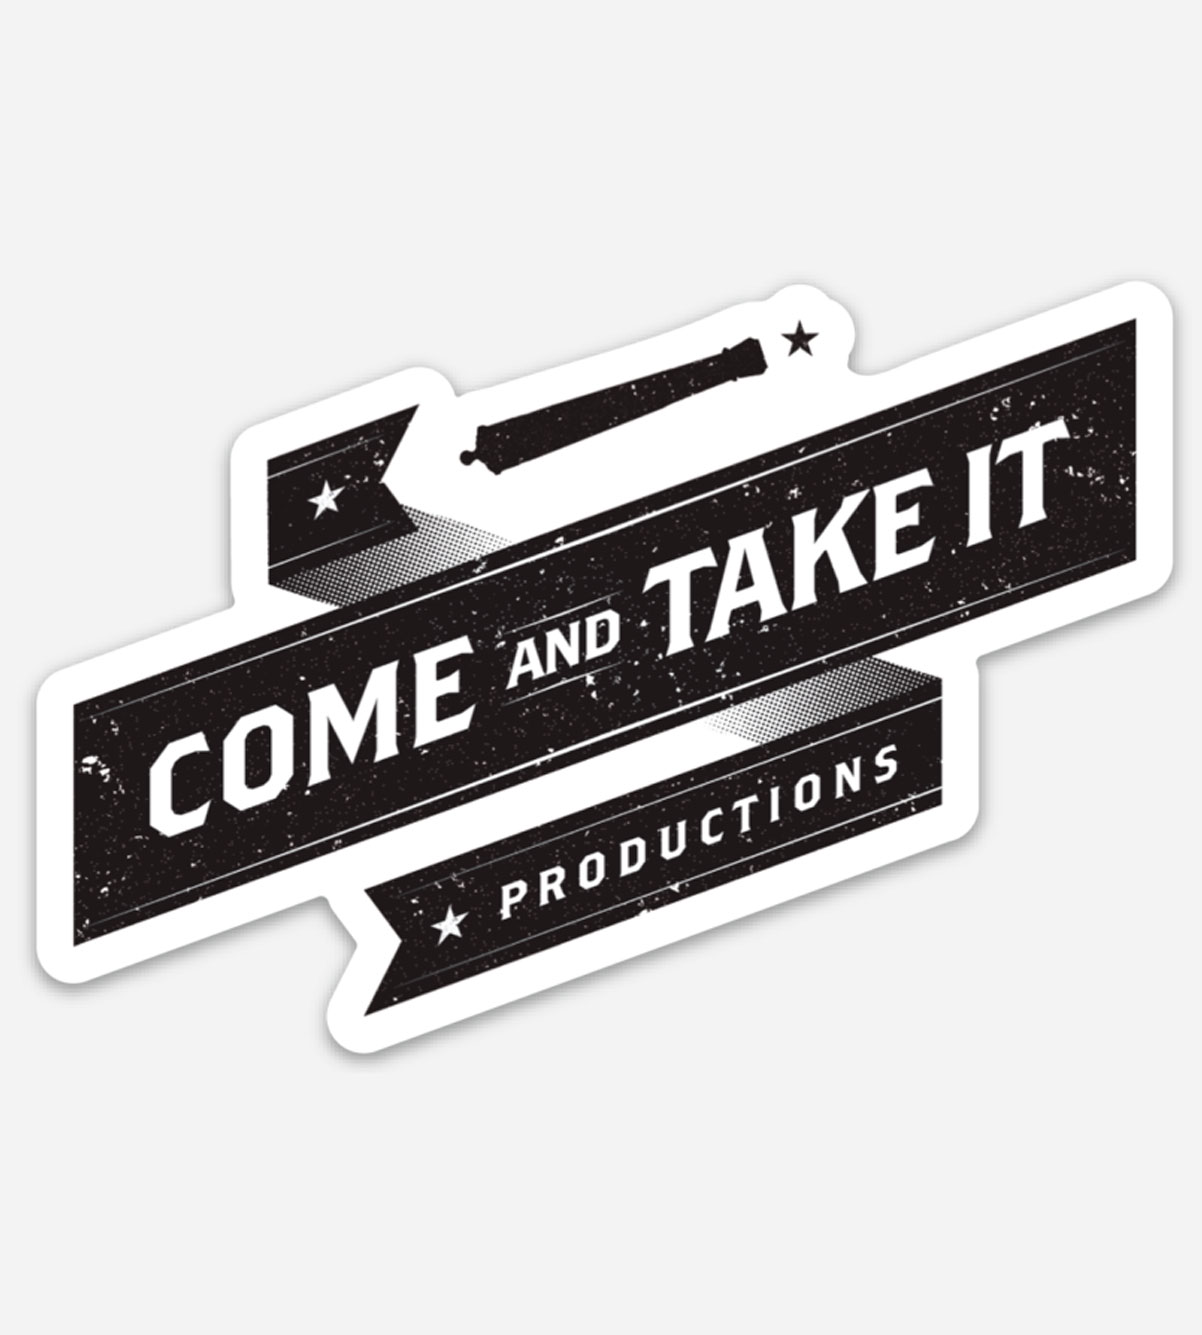 Come-and-Take-It-Productions-sticker-v2